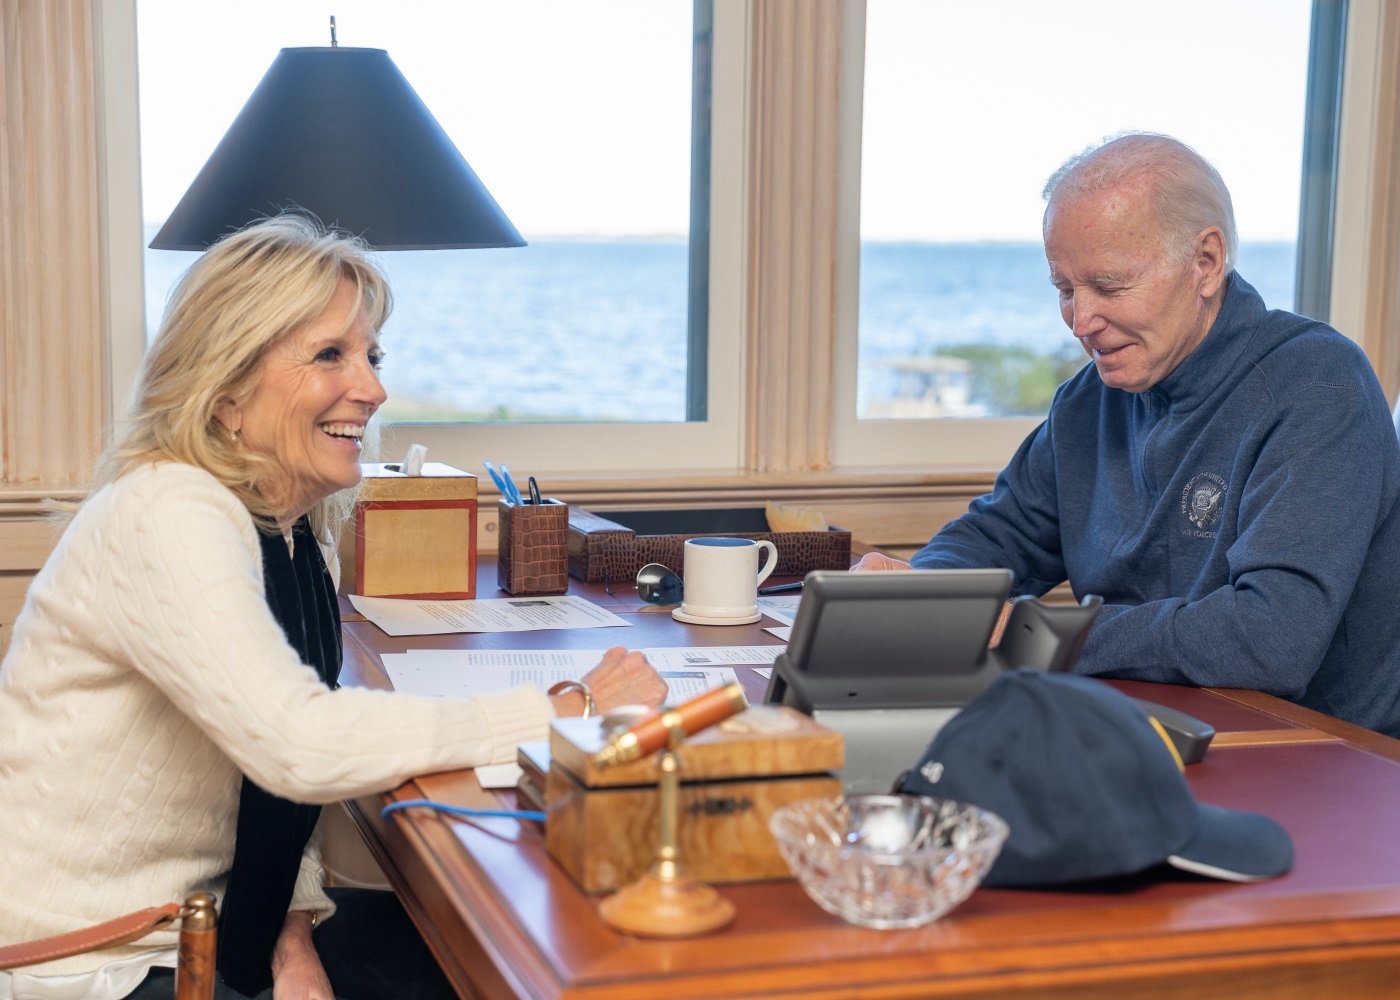 The president and first lady in the Abram’s Point compound overlooking Nantucket Harbor where they stayed last week. The property is owned by billionaire Washington, D.C. philanthropist David Rubenstein, co-founder of the Carlyle Group.